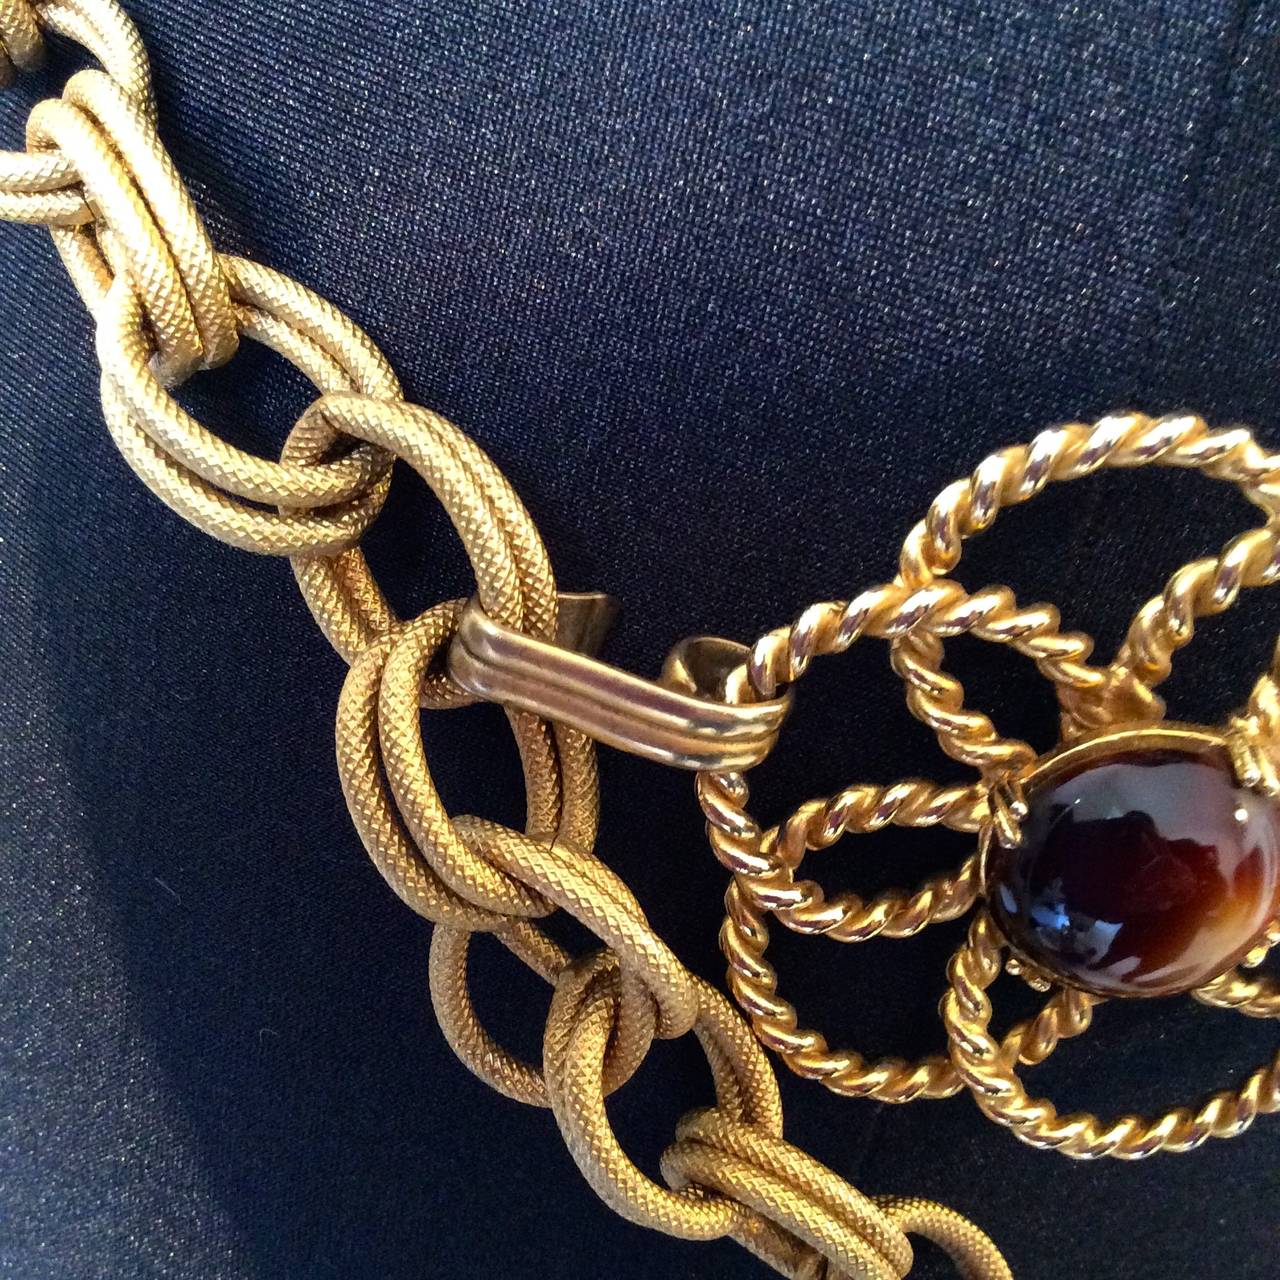 Rare 1970's Yves Saint Laurent Belt with amber colored cabochon stones with pearlescent tone. Belt is adjustable for varying sizes but entire length of built is 44 inches. Floral design with matte finish gold tone. Hook close for belt.